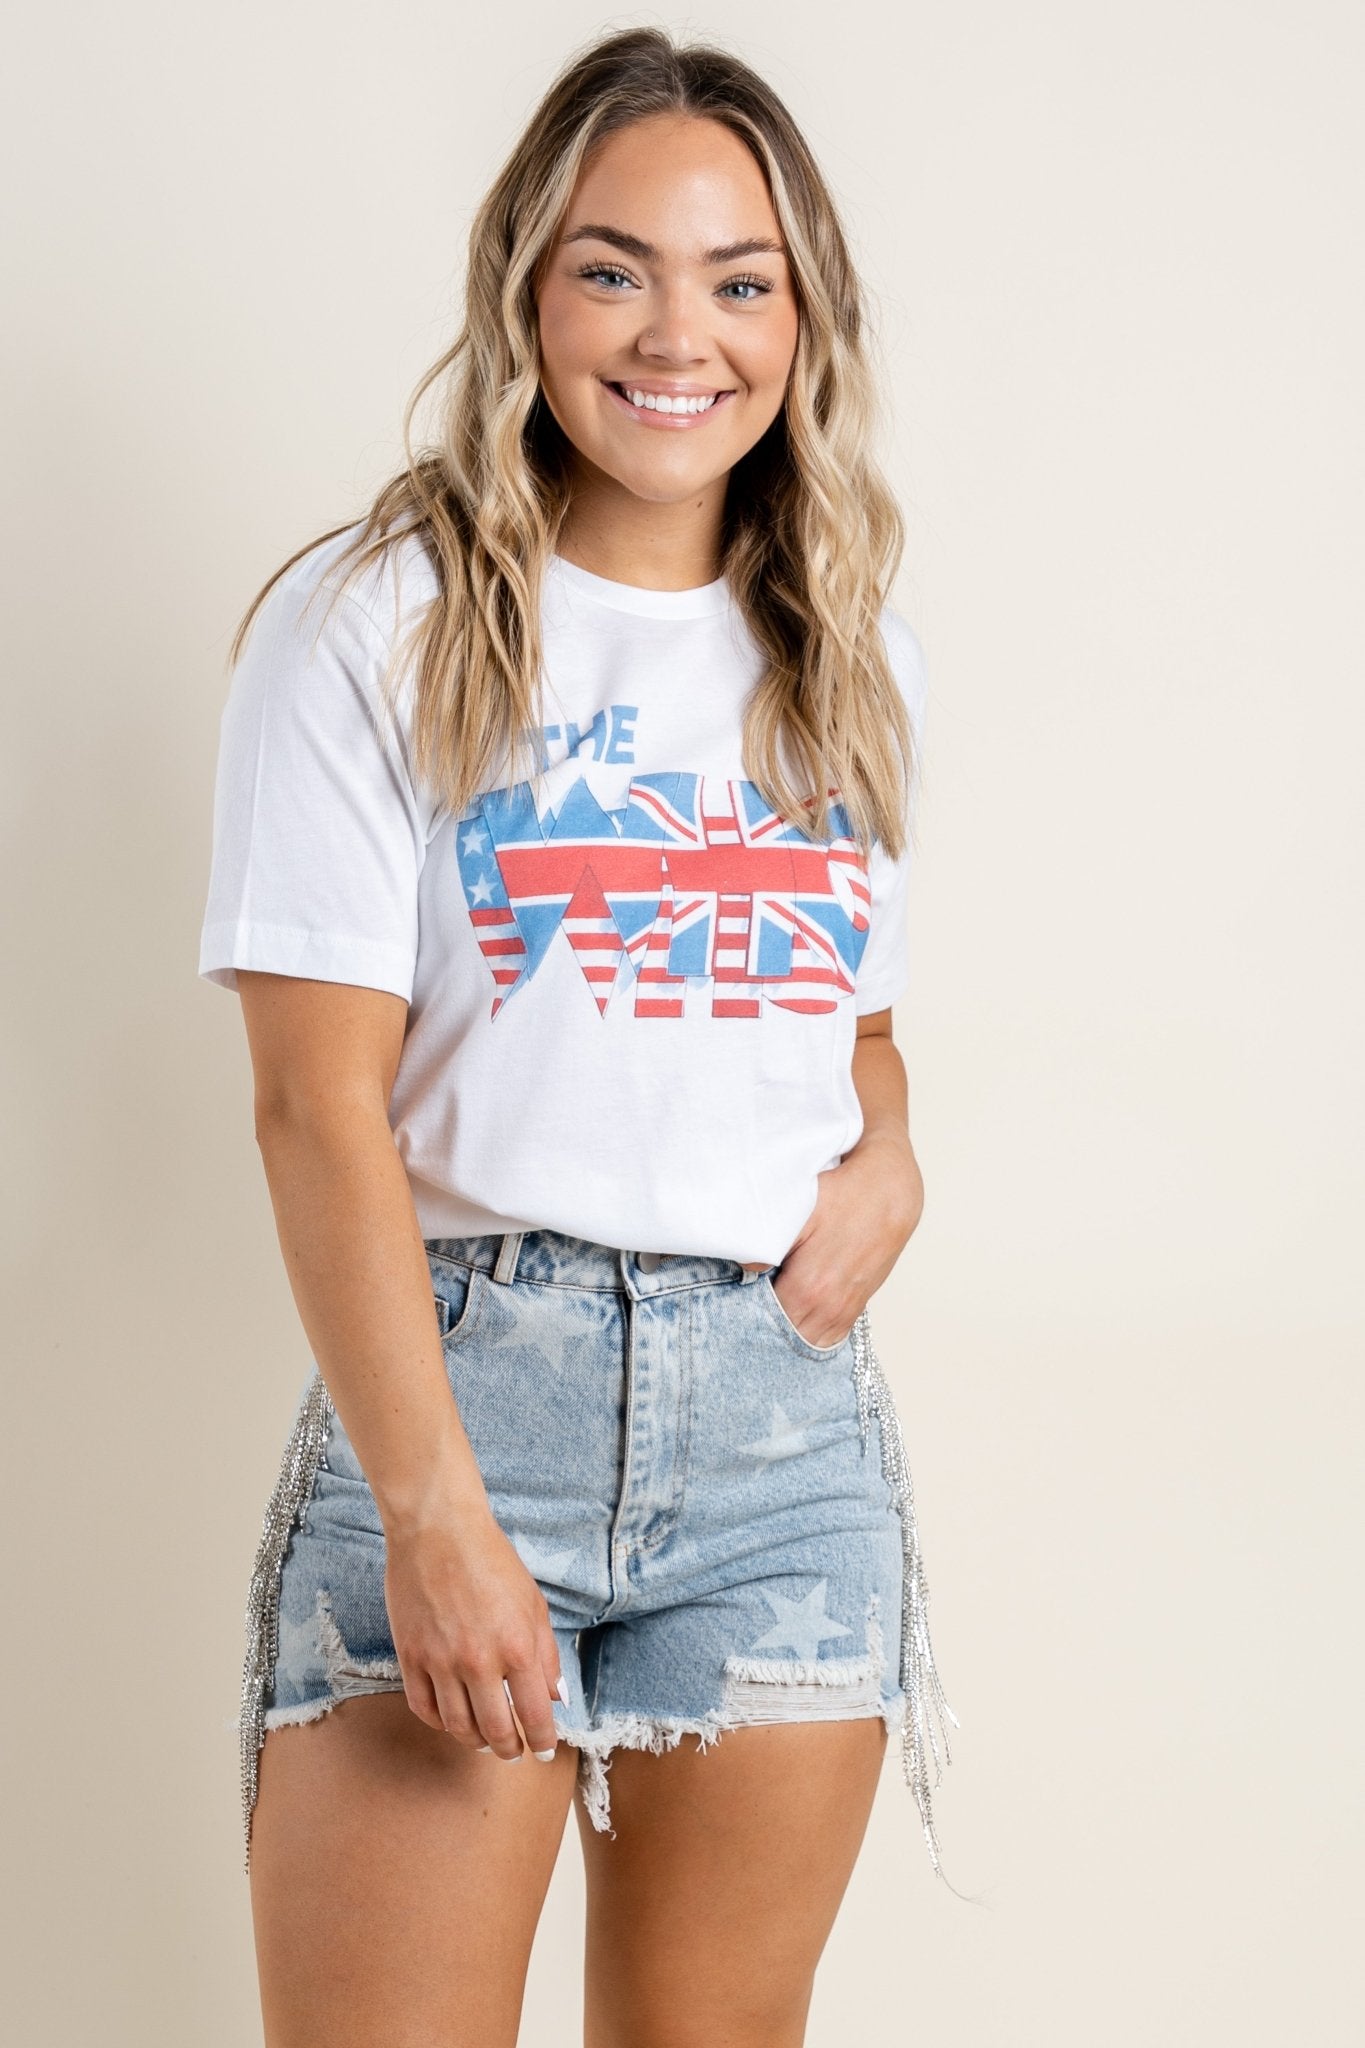 The Who double flag t-shirt white - Cute T-shirts - Trendy Graphic T-Shirts at Lush Fashion Lounge Boutique in Oklahoma City